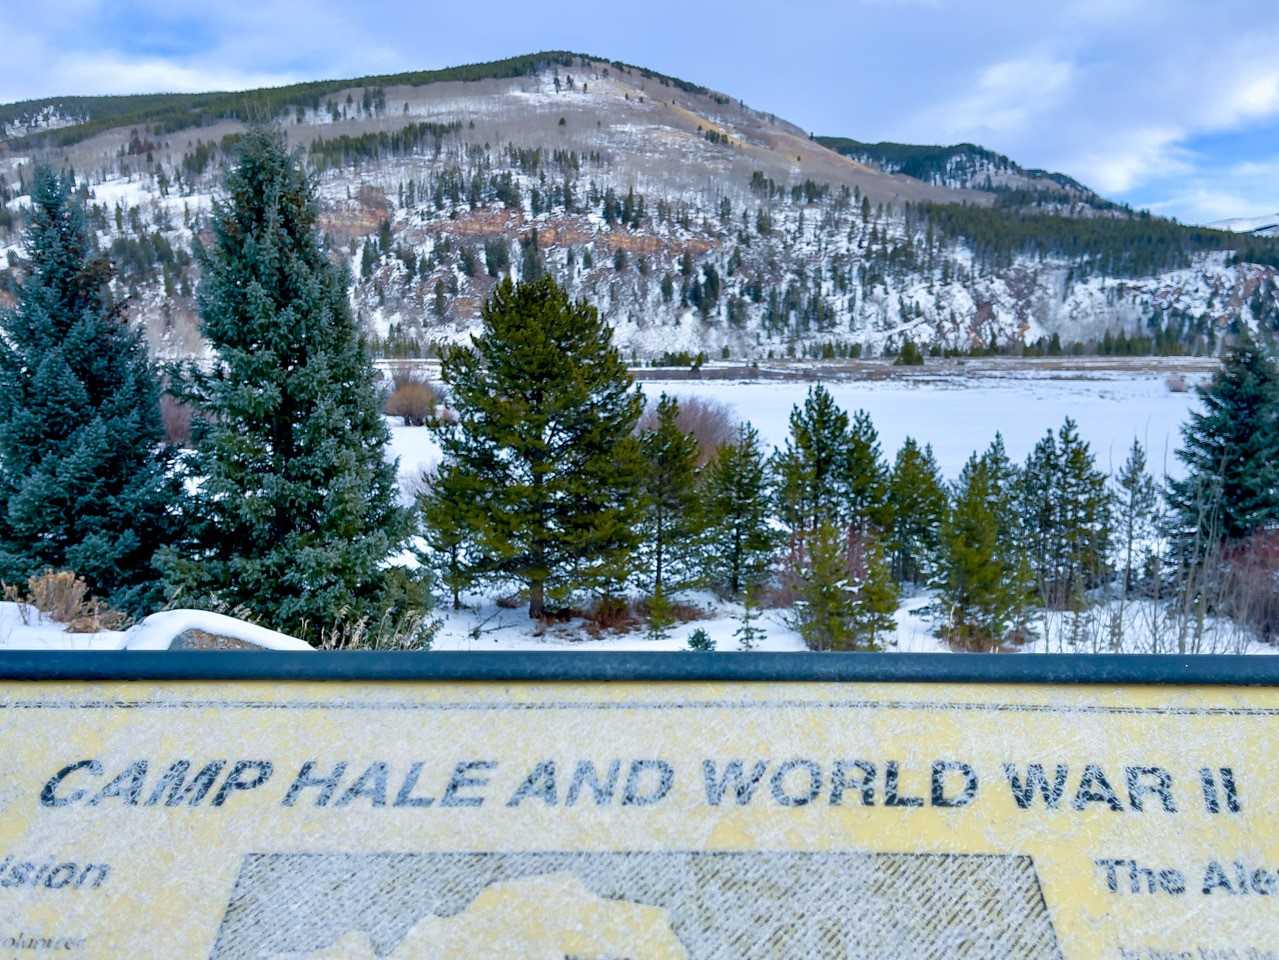 Informational sign that says Camp Hale and World War II shown at the bottom of the image, with a snowy mountain and meadow, and cascading pine trees, on the top half of the photo.